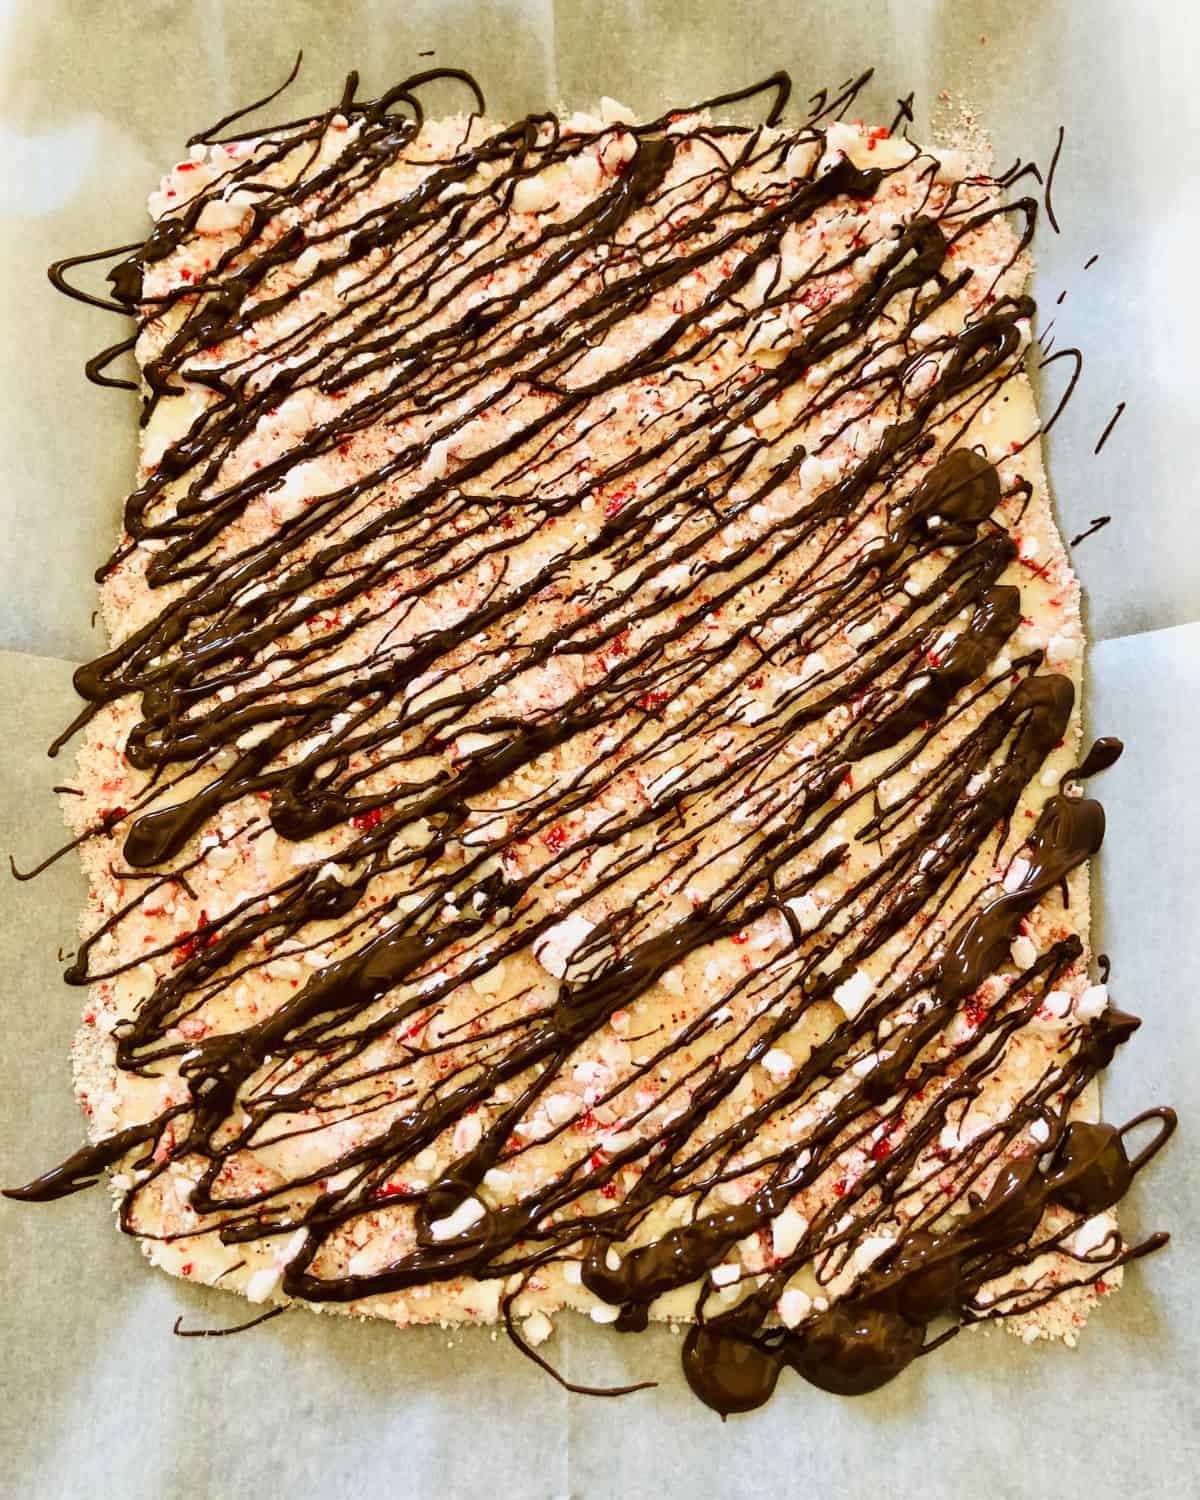 White Chocolate Peppermint Bark drizzled with melted chocolate.